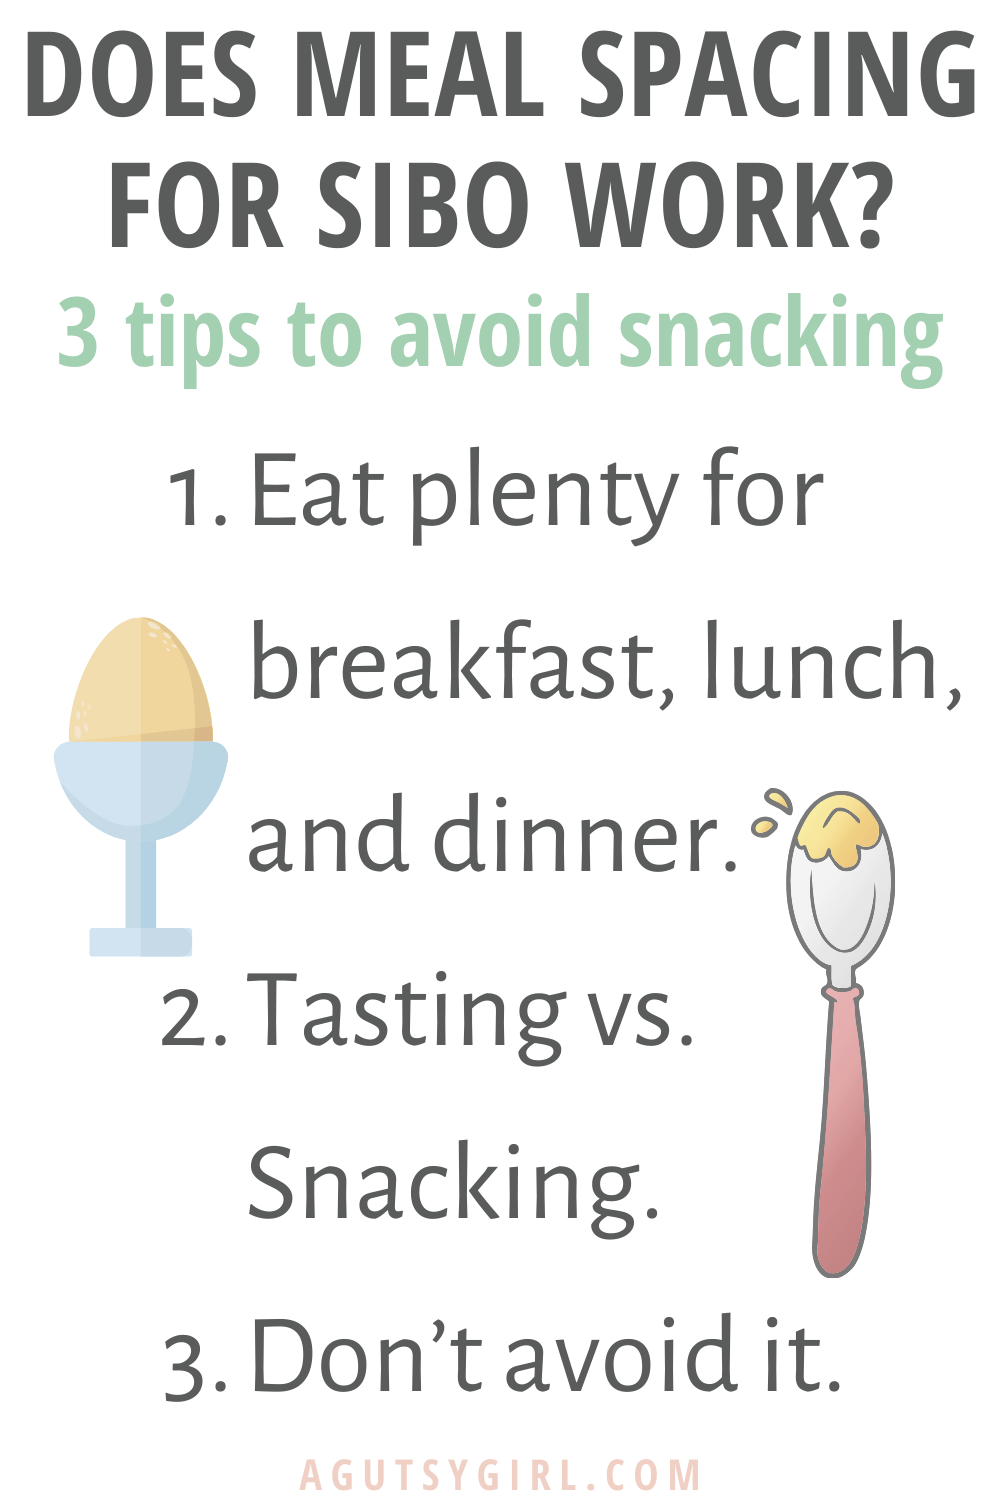 Does Meal Spacing for SIBO Work? agutsygirl.com 3 tips to avoid snacking #mealspace #sibo #intermittentfast #guthealth